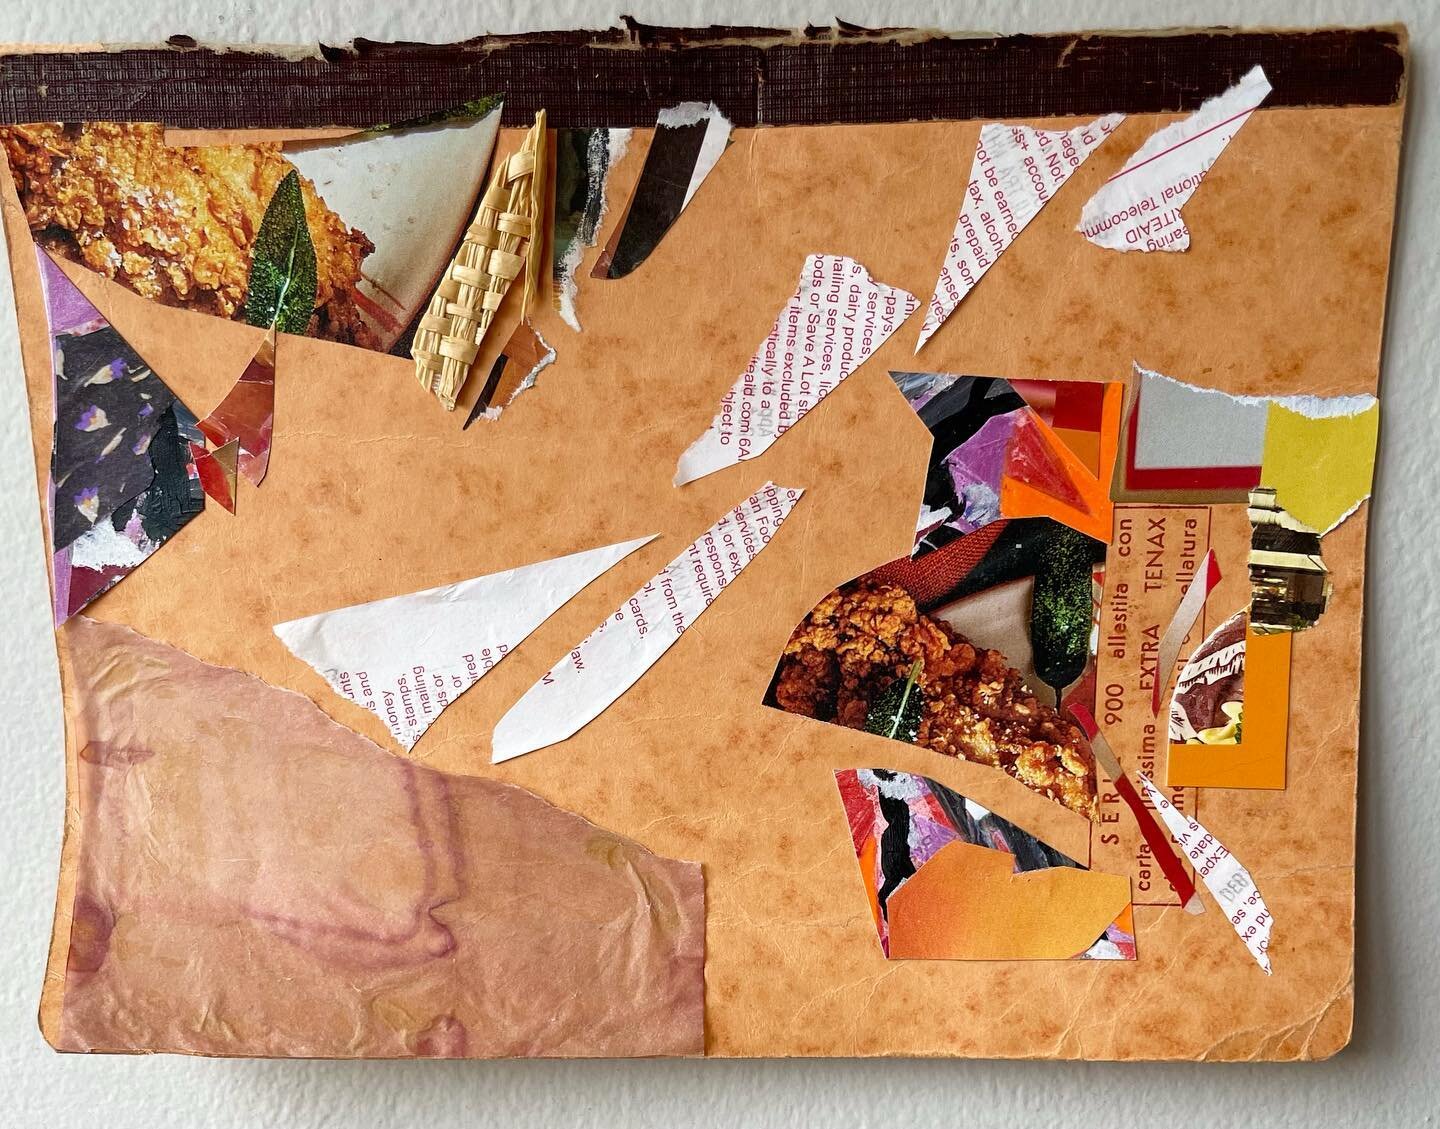 Exᴛʀᴀ Tᴇɴᴀx

Collage, paper, raffia, rose-dyed trace paper, netting, acrylic and glue on 
Vintage notebook cover (Italy 1950s)
8.25x6.25in. 
Apr 2023